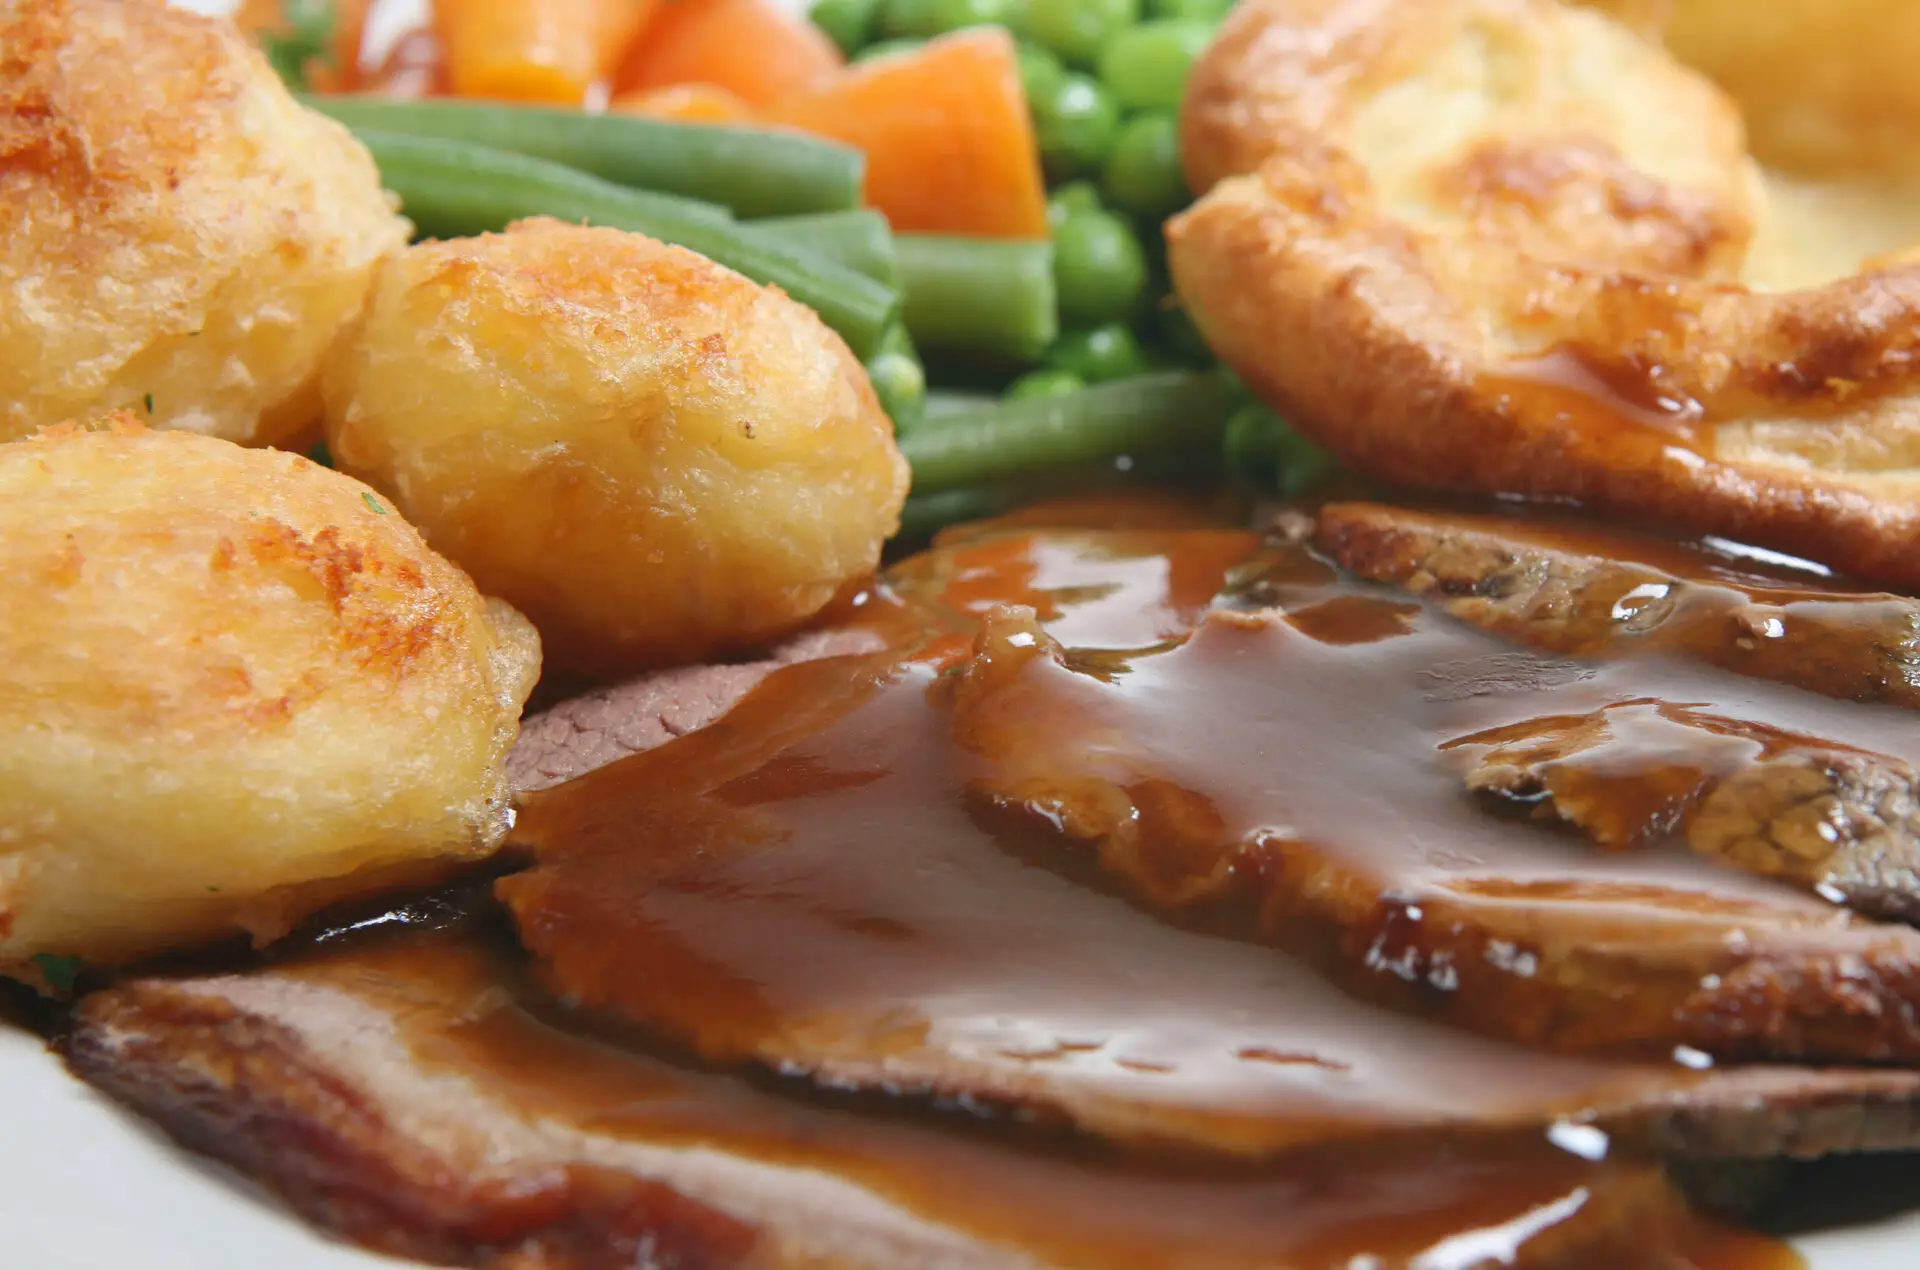 Close-up of a traditional Sunday roast dinner with beef, roast potatoes and vegetables drenched in gravy